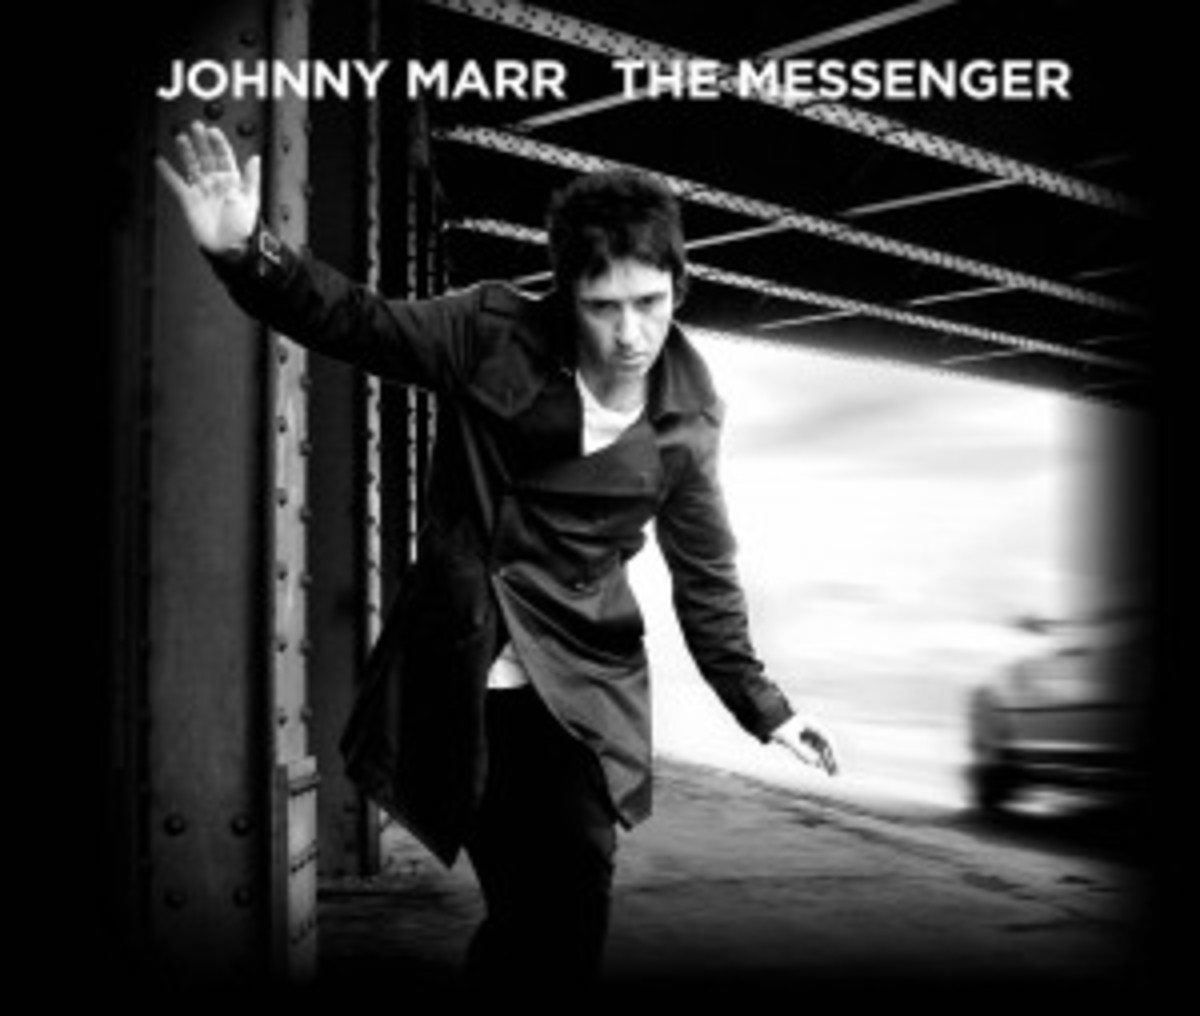 Johnny Marr performed songs from his new album, The Messenger, as well as classics from Electronic and The Smiths at his fantastic show at New York City’s Irving Plaza on Thursday, May 2nd.